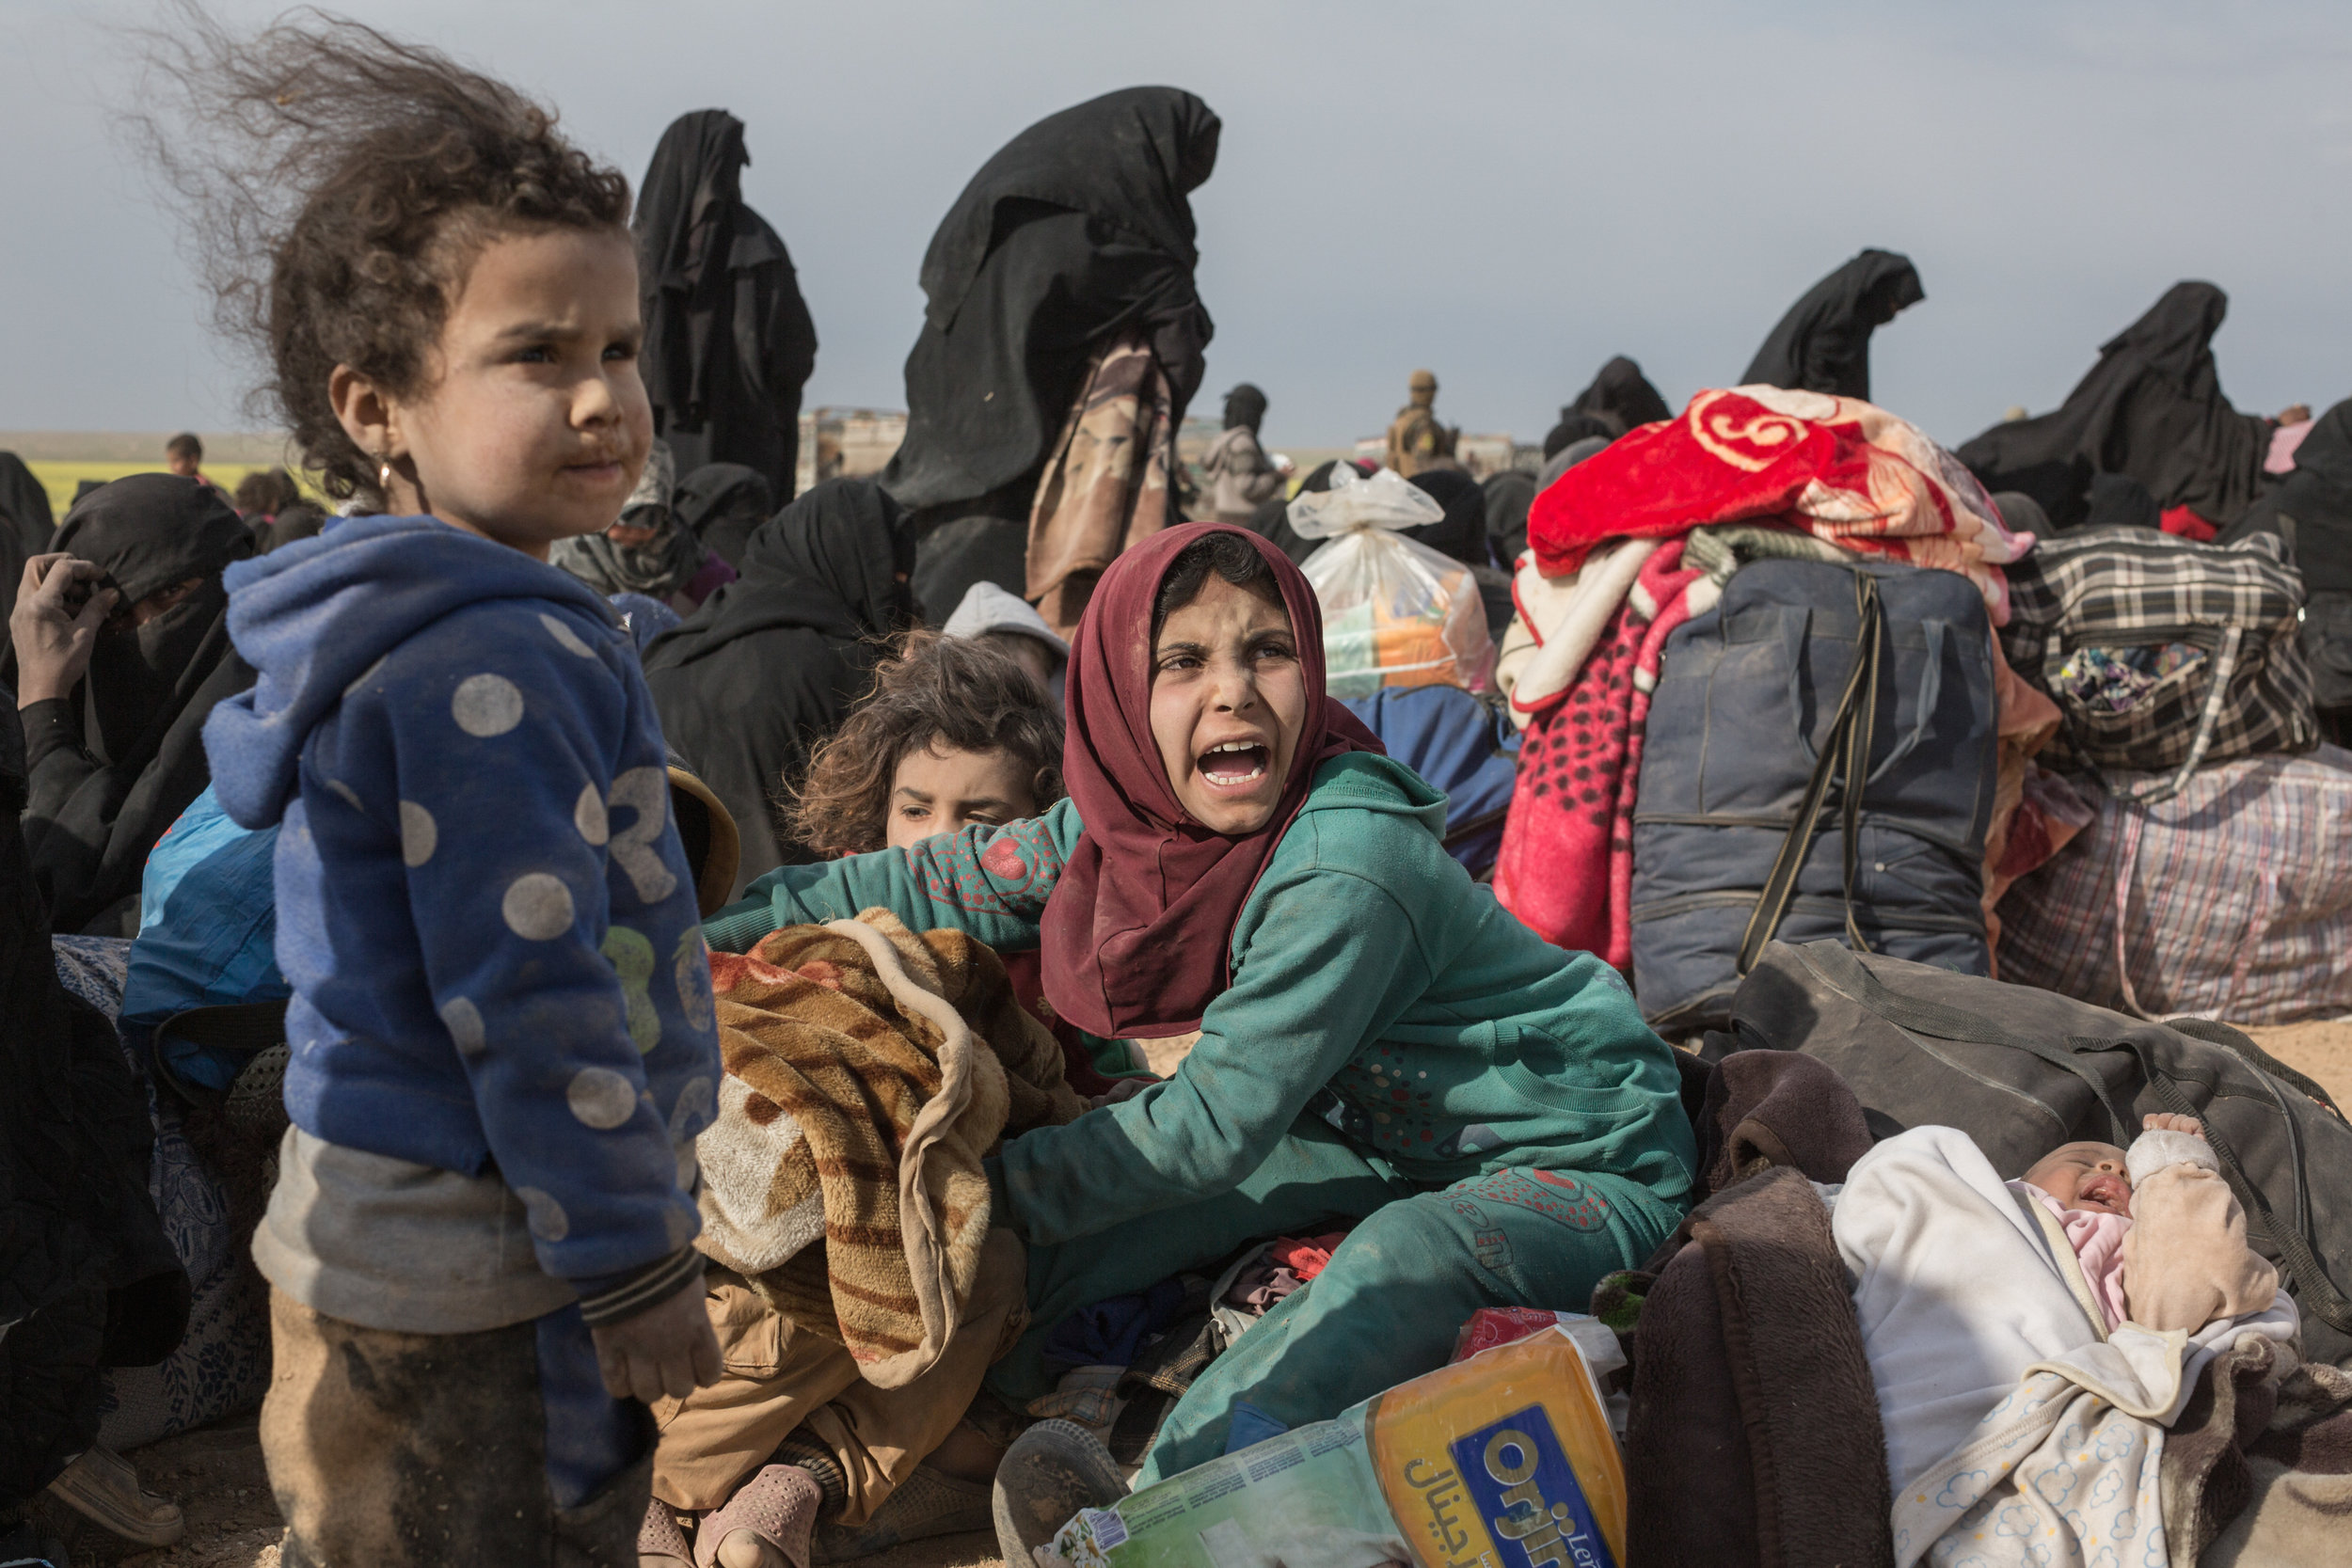  Civilians fleeing from ISIL's last remaining territory in Syria after two days of heavy fighting wait at a gathering point before being taken to internment camp, near Baghuz, in north eastern Syria.
Photo by Sam Tarling, 05 March 2019
 